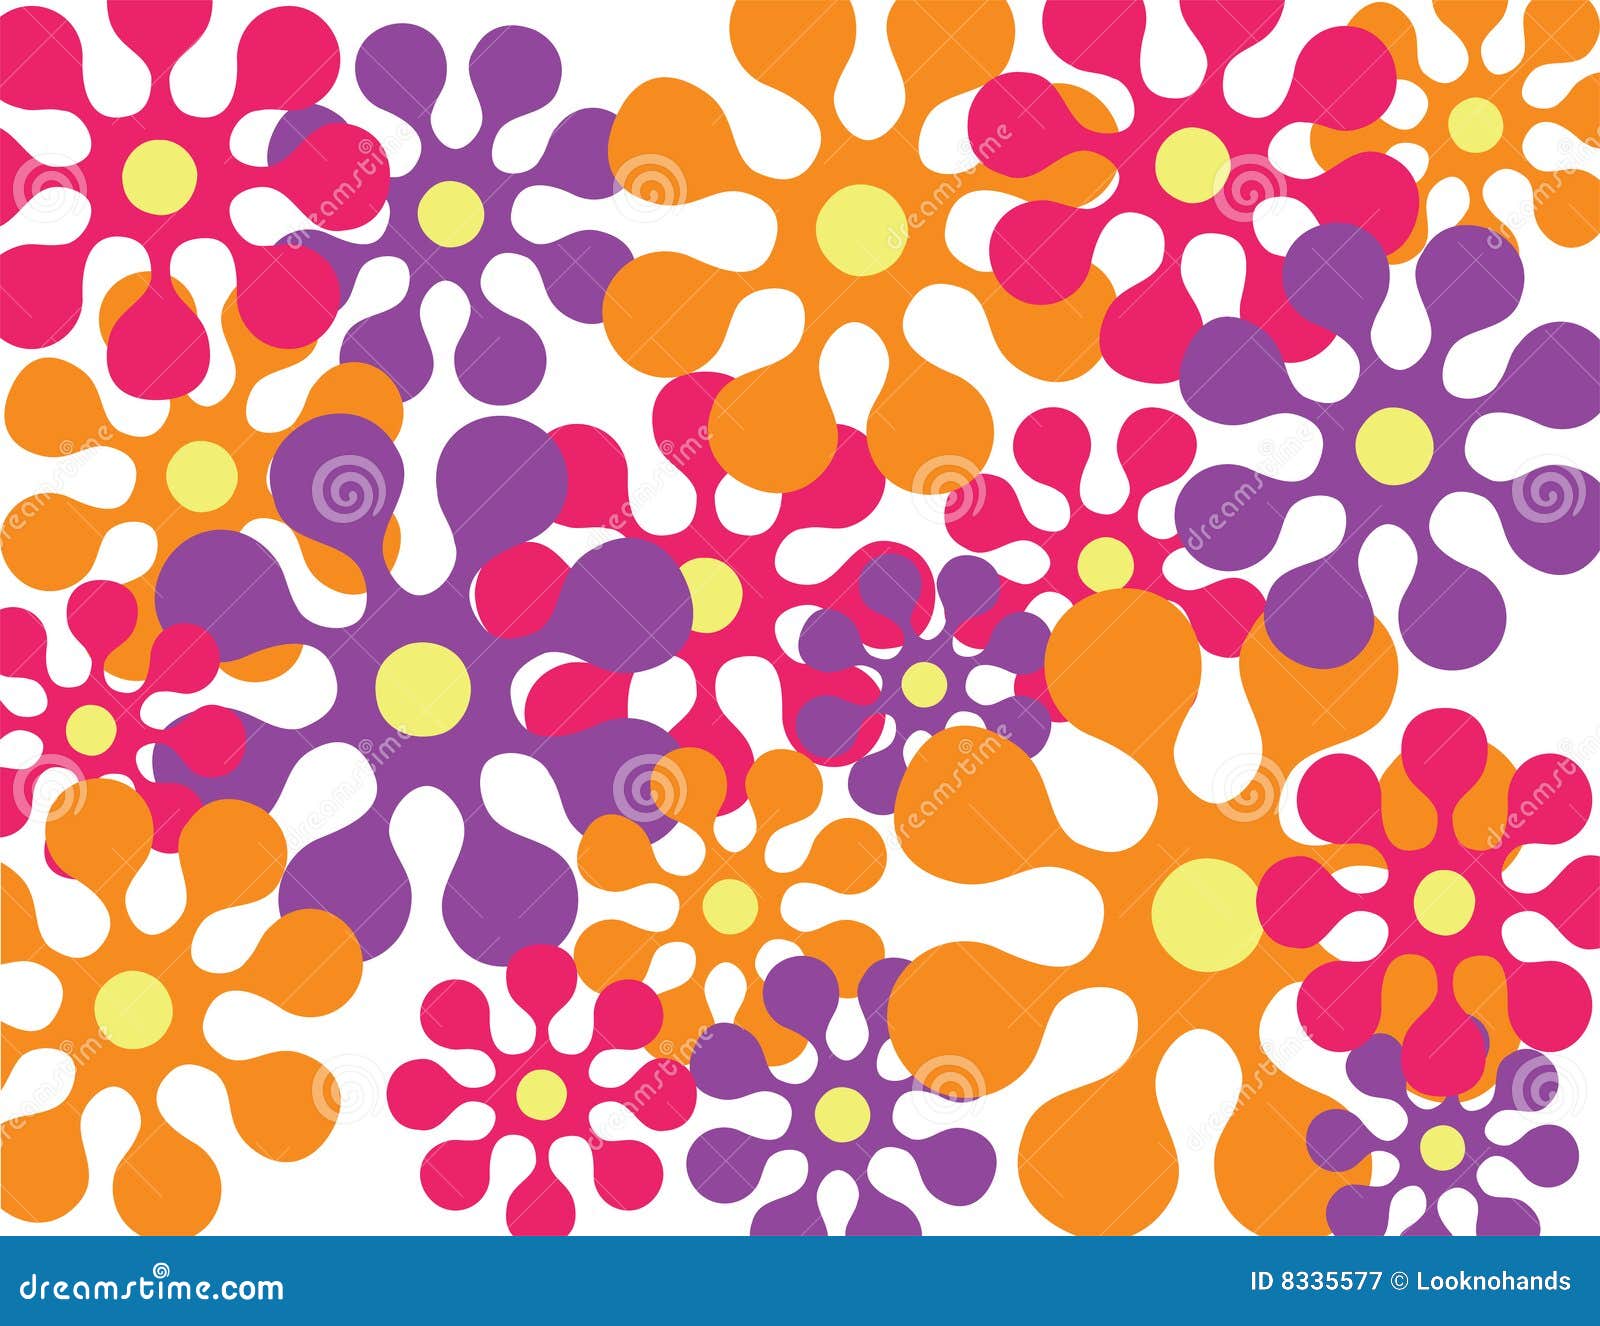 Retro flower background stock vector. Illustration of abstract - 8335577